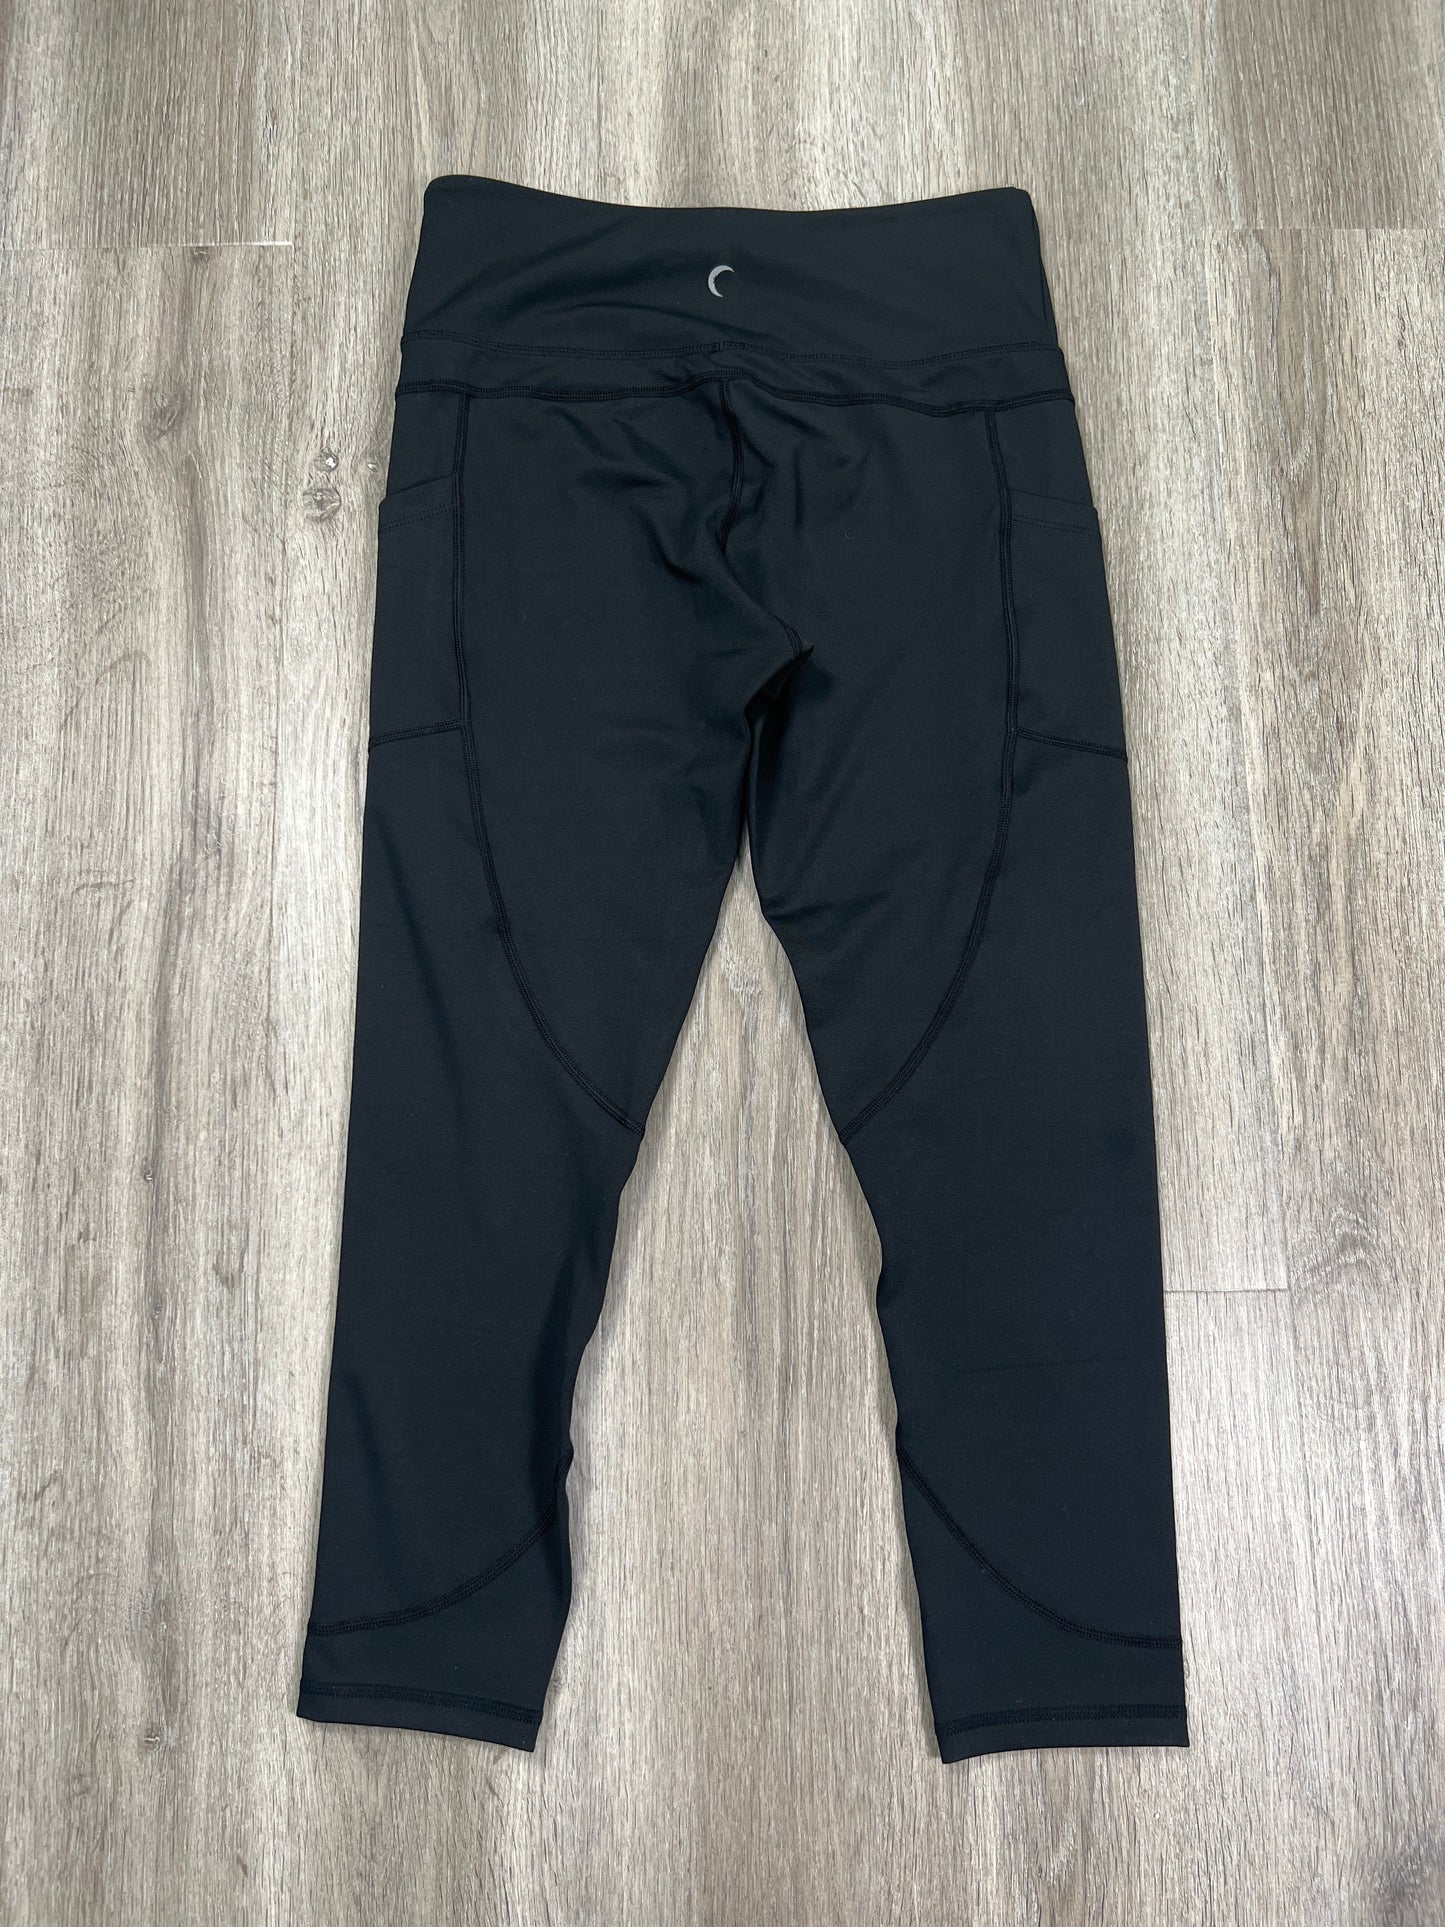 Athletic Leggings By Zyia  Size: L